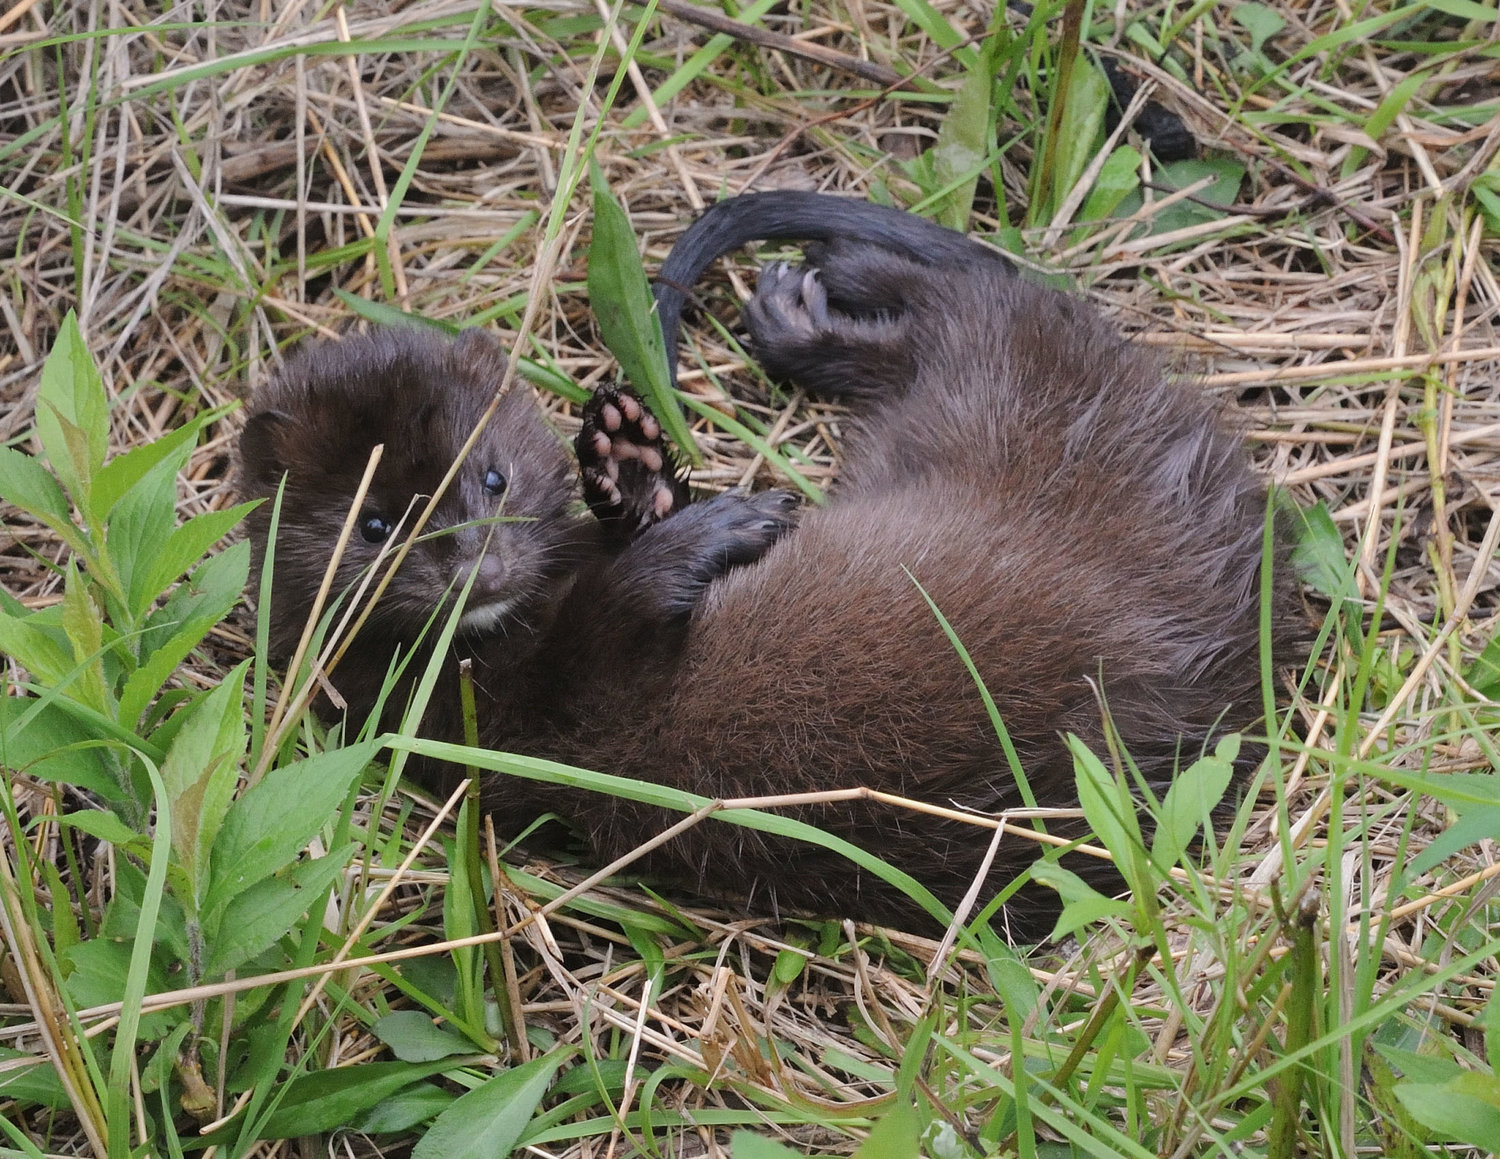 Martens are about the same size and shape as this mink. Minks and martens both eat small mammals, as well as other things. A marten will also consume soft mast; it is considered an omnivore. Where minks are found near shore and wetland habitats, martens thrive in forest environments unfragmented by roads or development. Historical records show martins present in Pike, Wayne and Monroe counties in PA until the early 1900s.